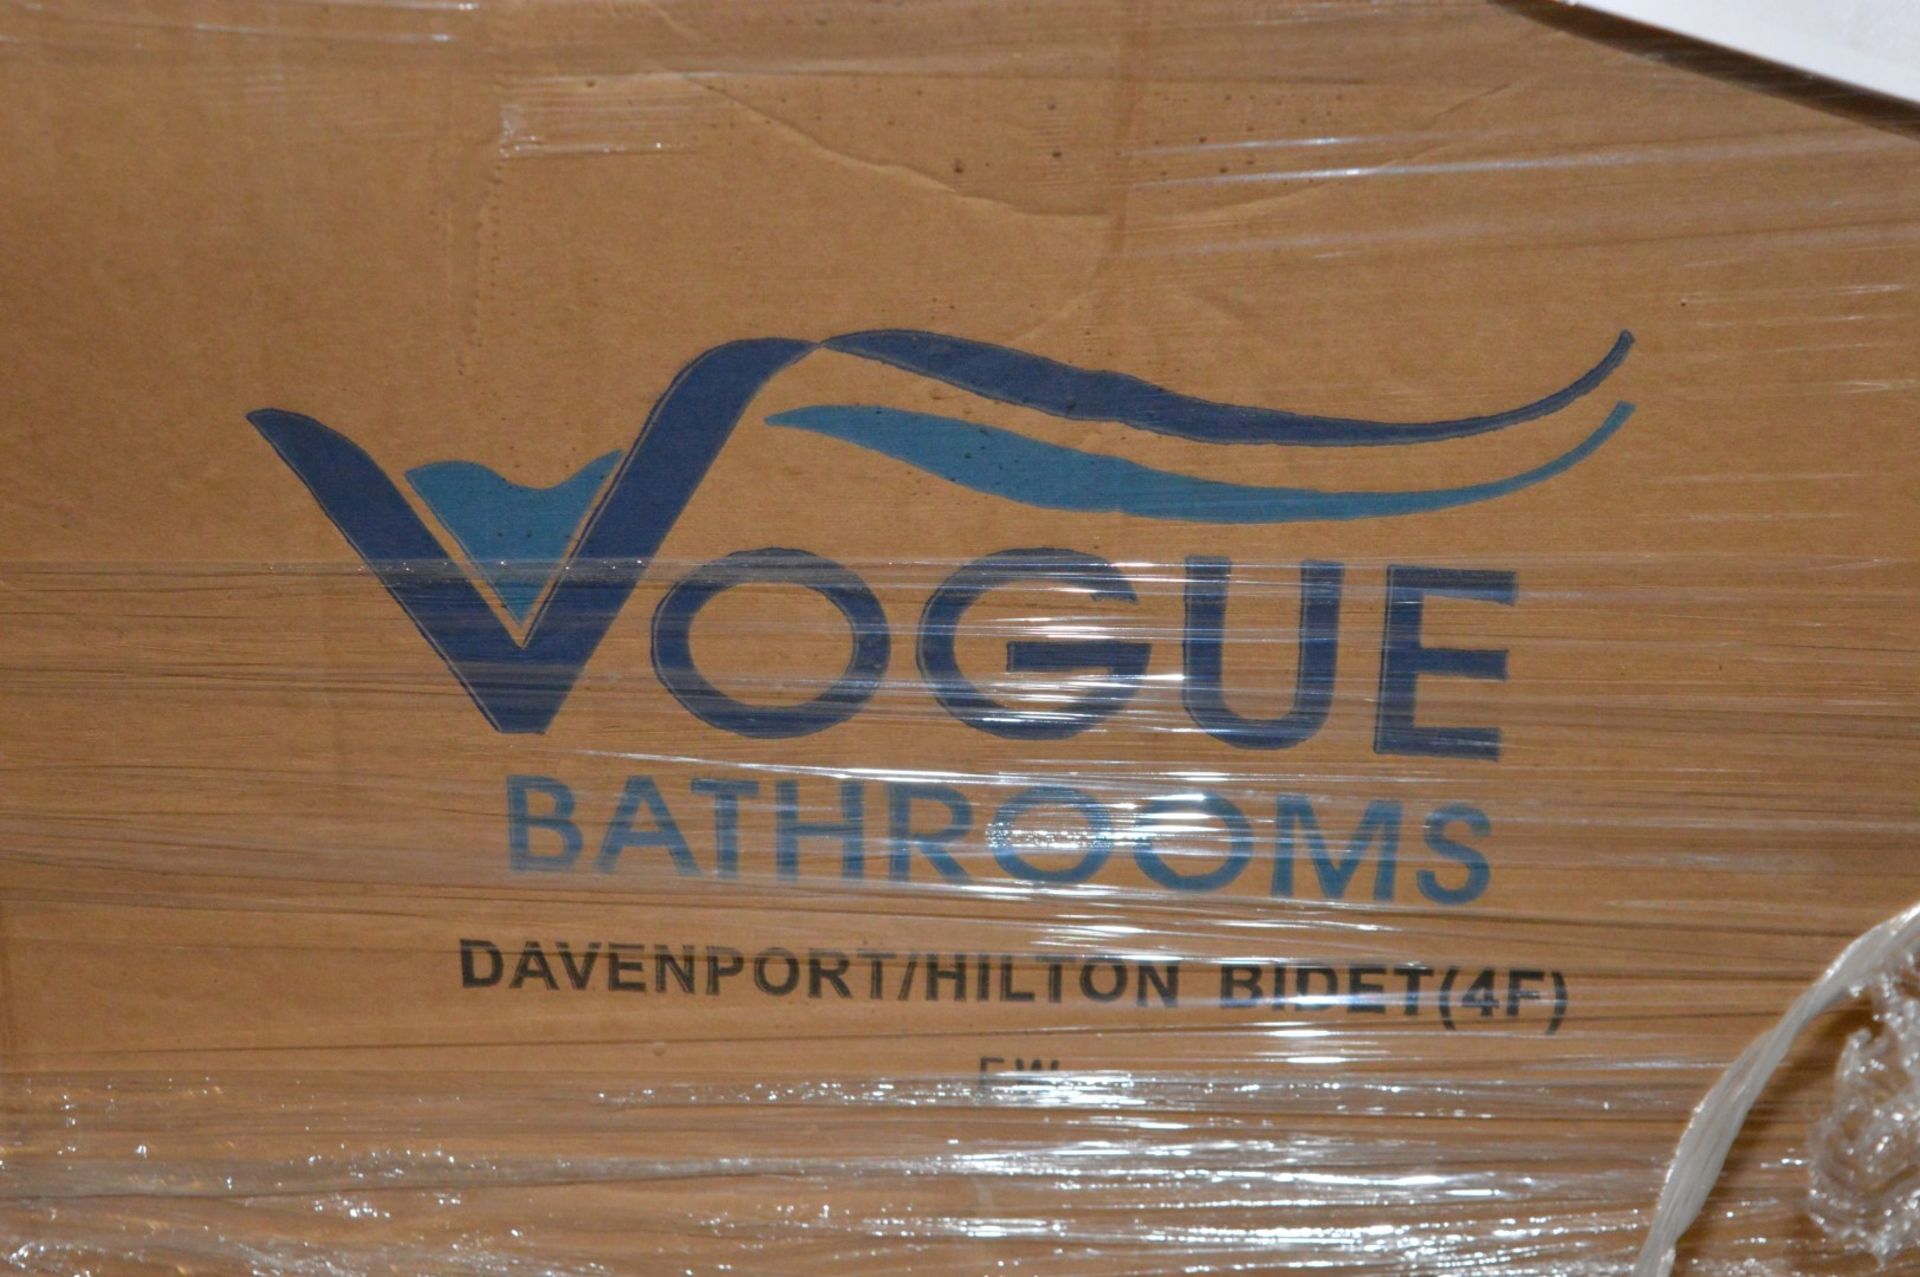 1 x Vogue Bathrooms DAVENPORT Single Tap Hole BIDET - Brand New and Boxed - High Quality White - Image 2 of 3